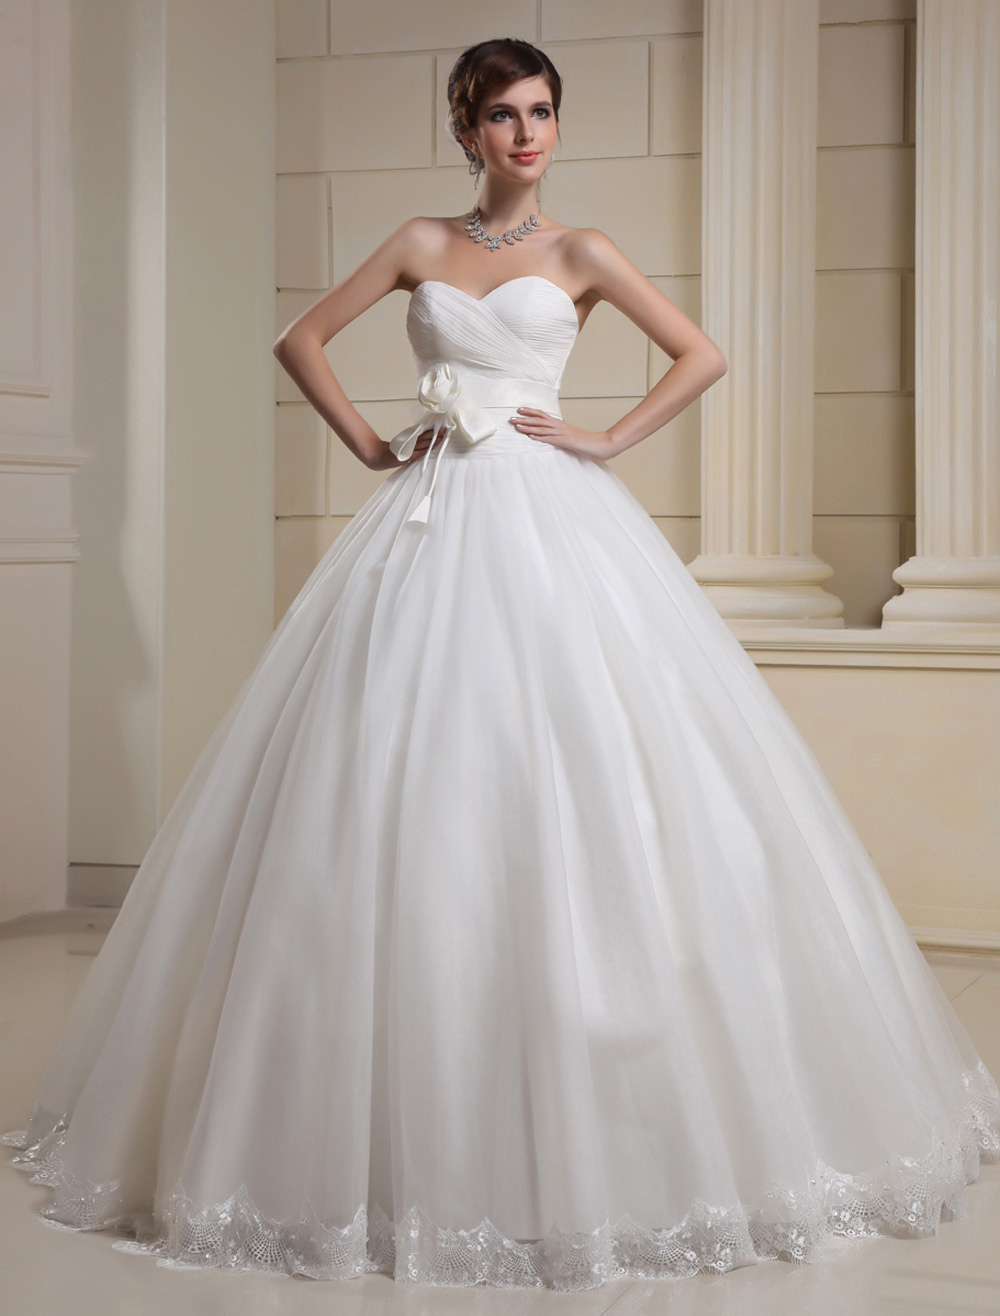 White Ball Gown Sweetheart Floral Applique Tulle Bridal Wedding Dress ...